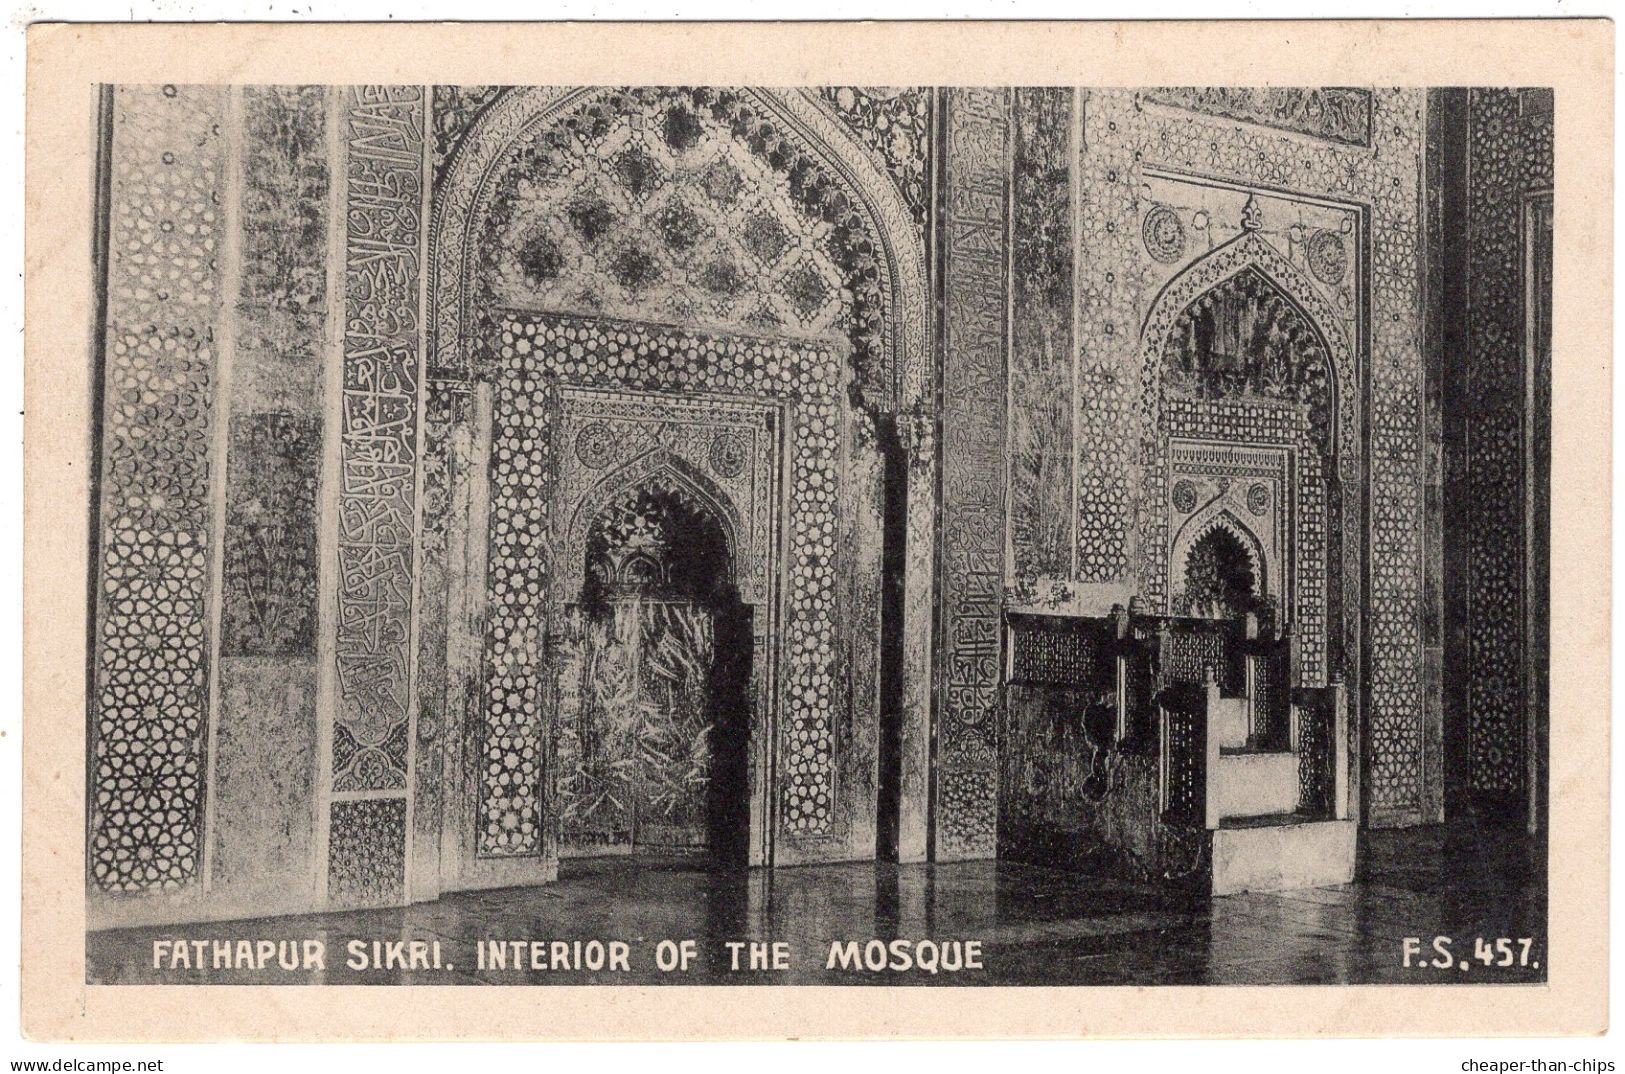 FATHAPUR SIKRI - Interior Of The Mosque - Macropolo  F.S. 457 - India